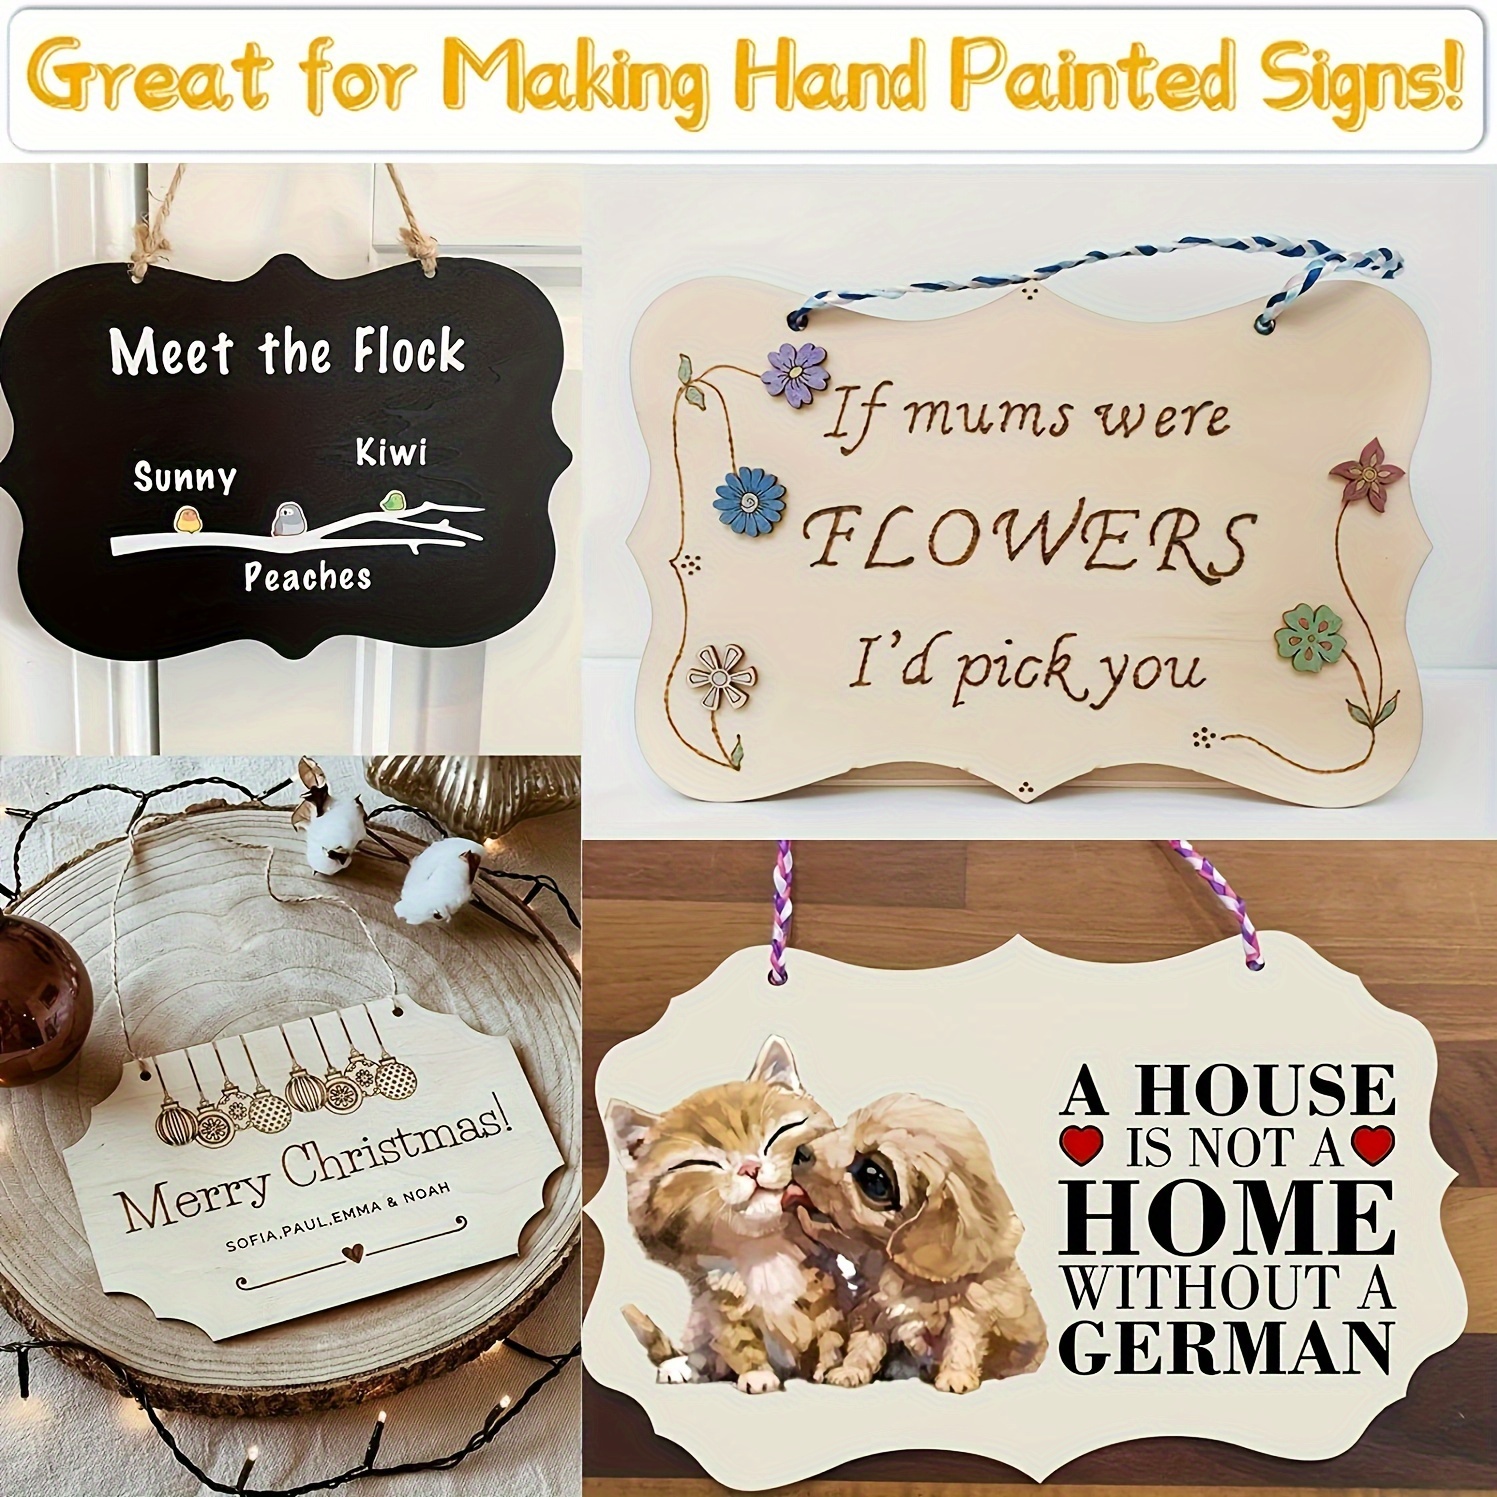 

12pcs/set, Wooden Blank Hanging Sign, Diy Wooden Painting Decorative Sign Craft, Home Decor, Gift, Play Your Imagination